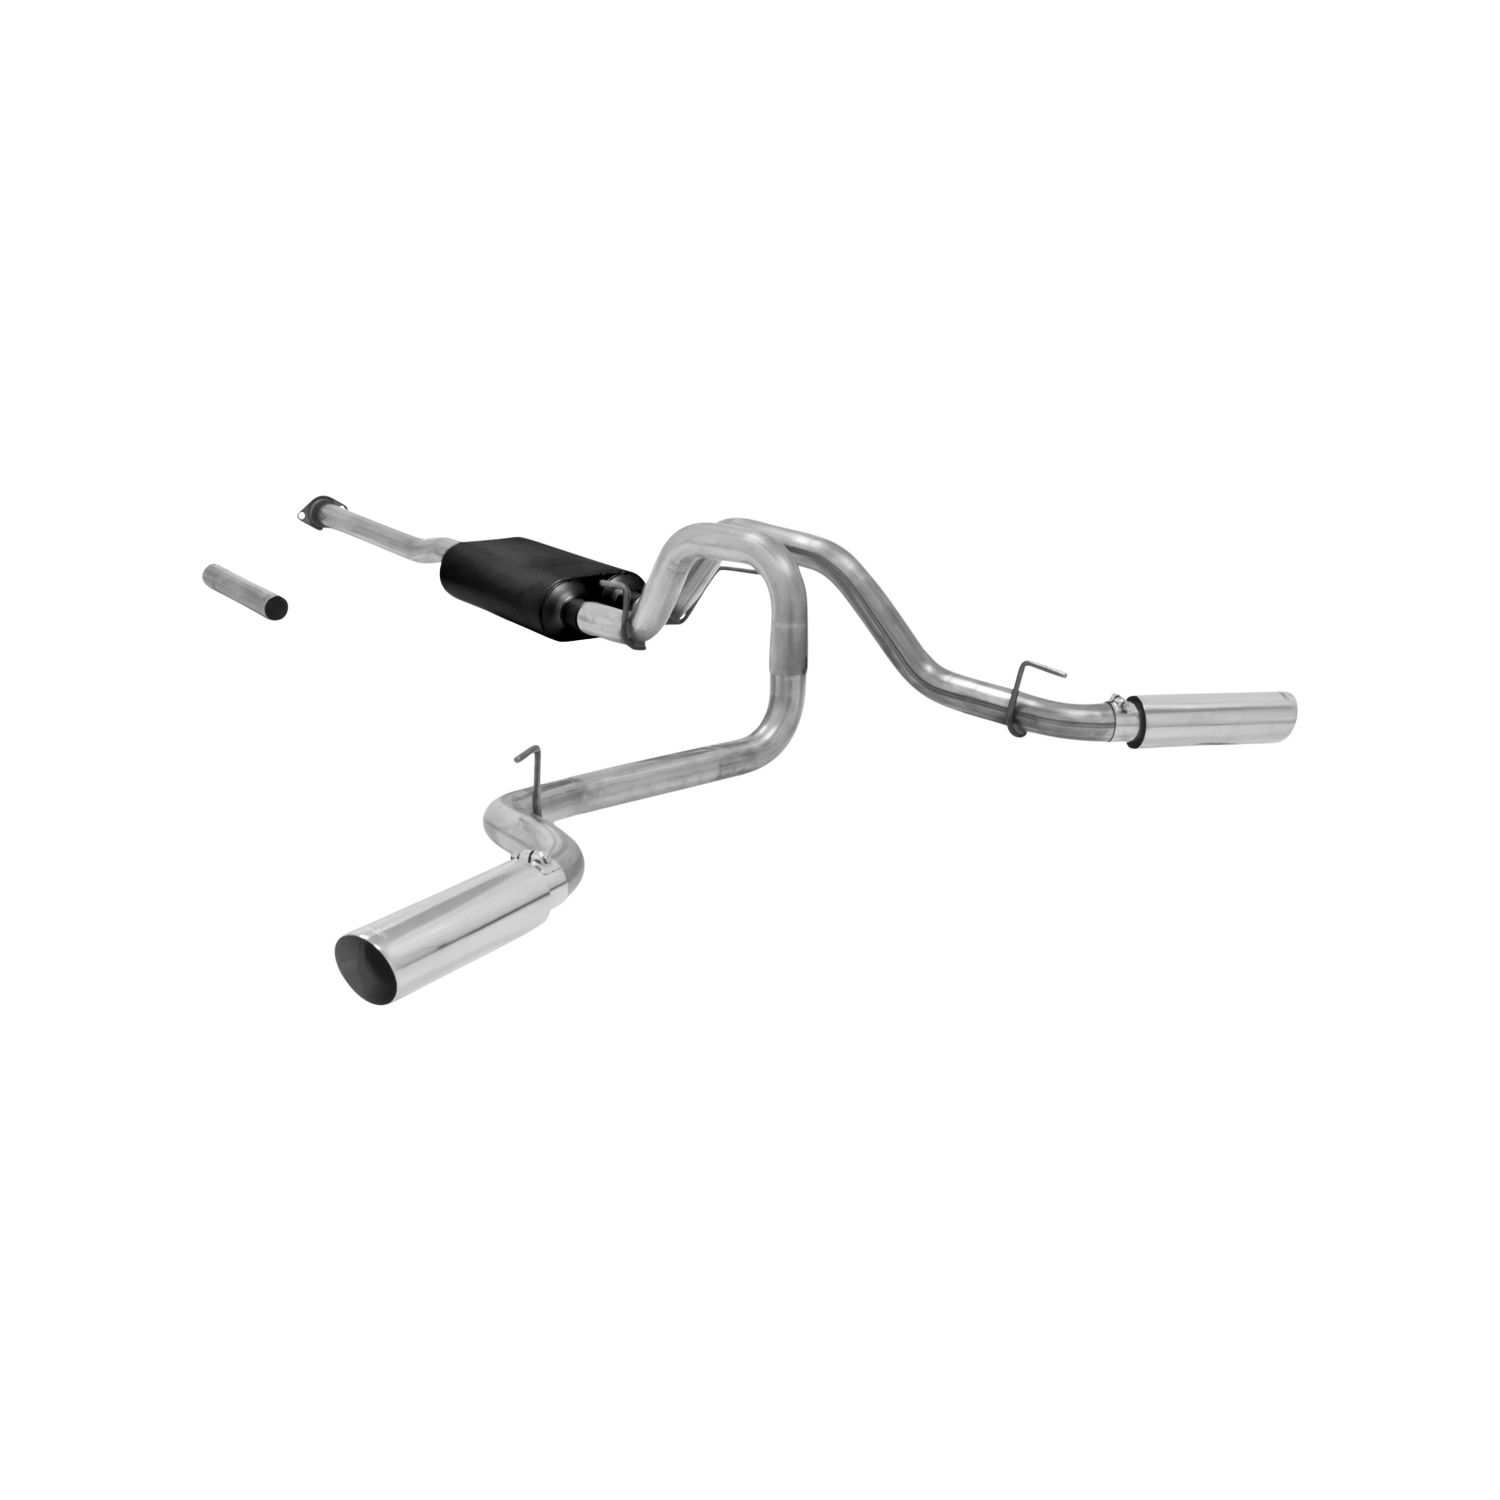 2013-2014 Toyota Tacoma Base/Pre Runner 4.0L 4DR Crew Cab/EXT Cab Flowmaster American Thunder Cat-Back Exhaust